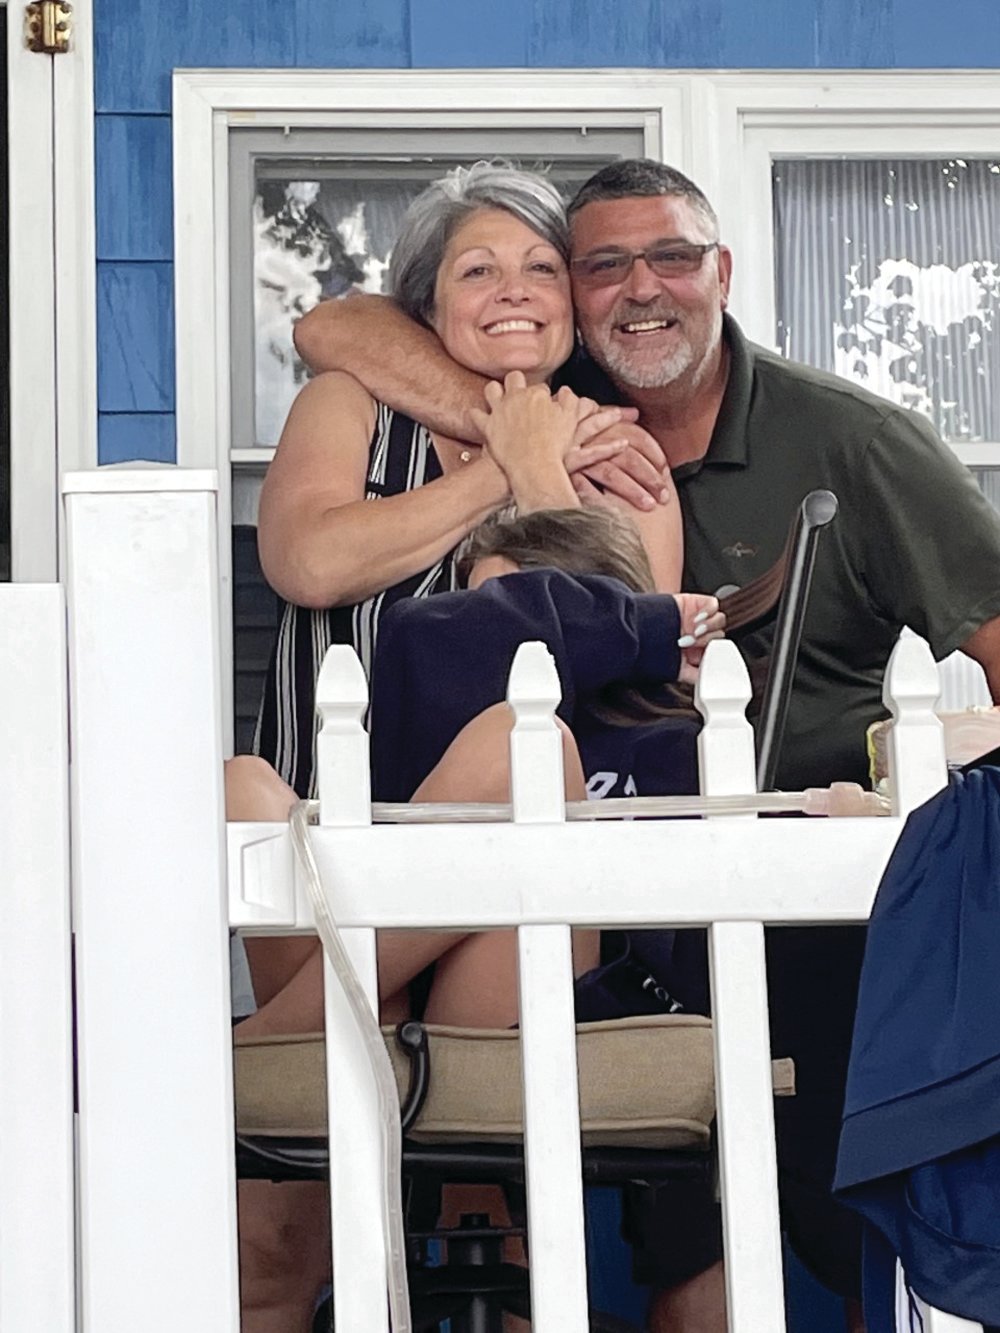 ALL SMILES: Patti and Billy smile for a photo. Billy was diagnosed with bile duct cancer in January and passed away Feb. 12 at age 55. To honor his memory, his sisters are looking to create a scholarship for Johnson and Wales University students.